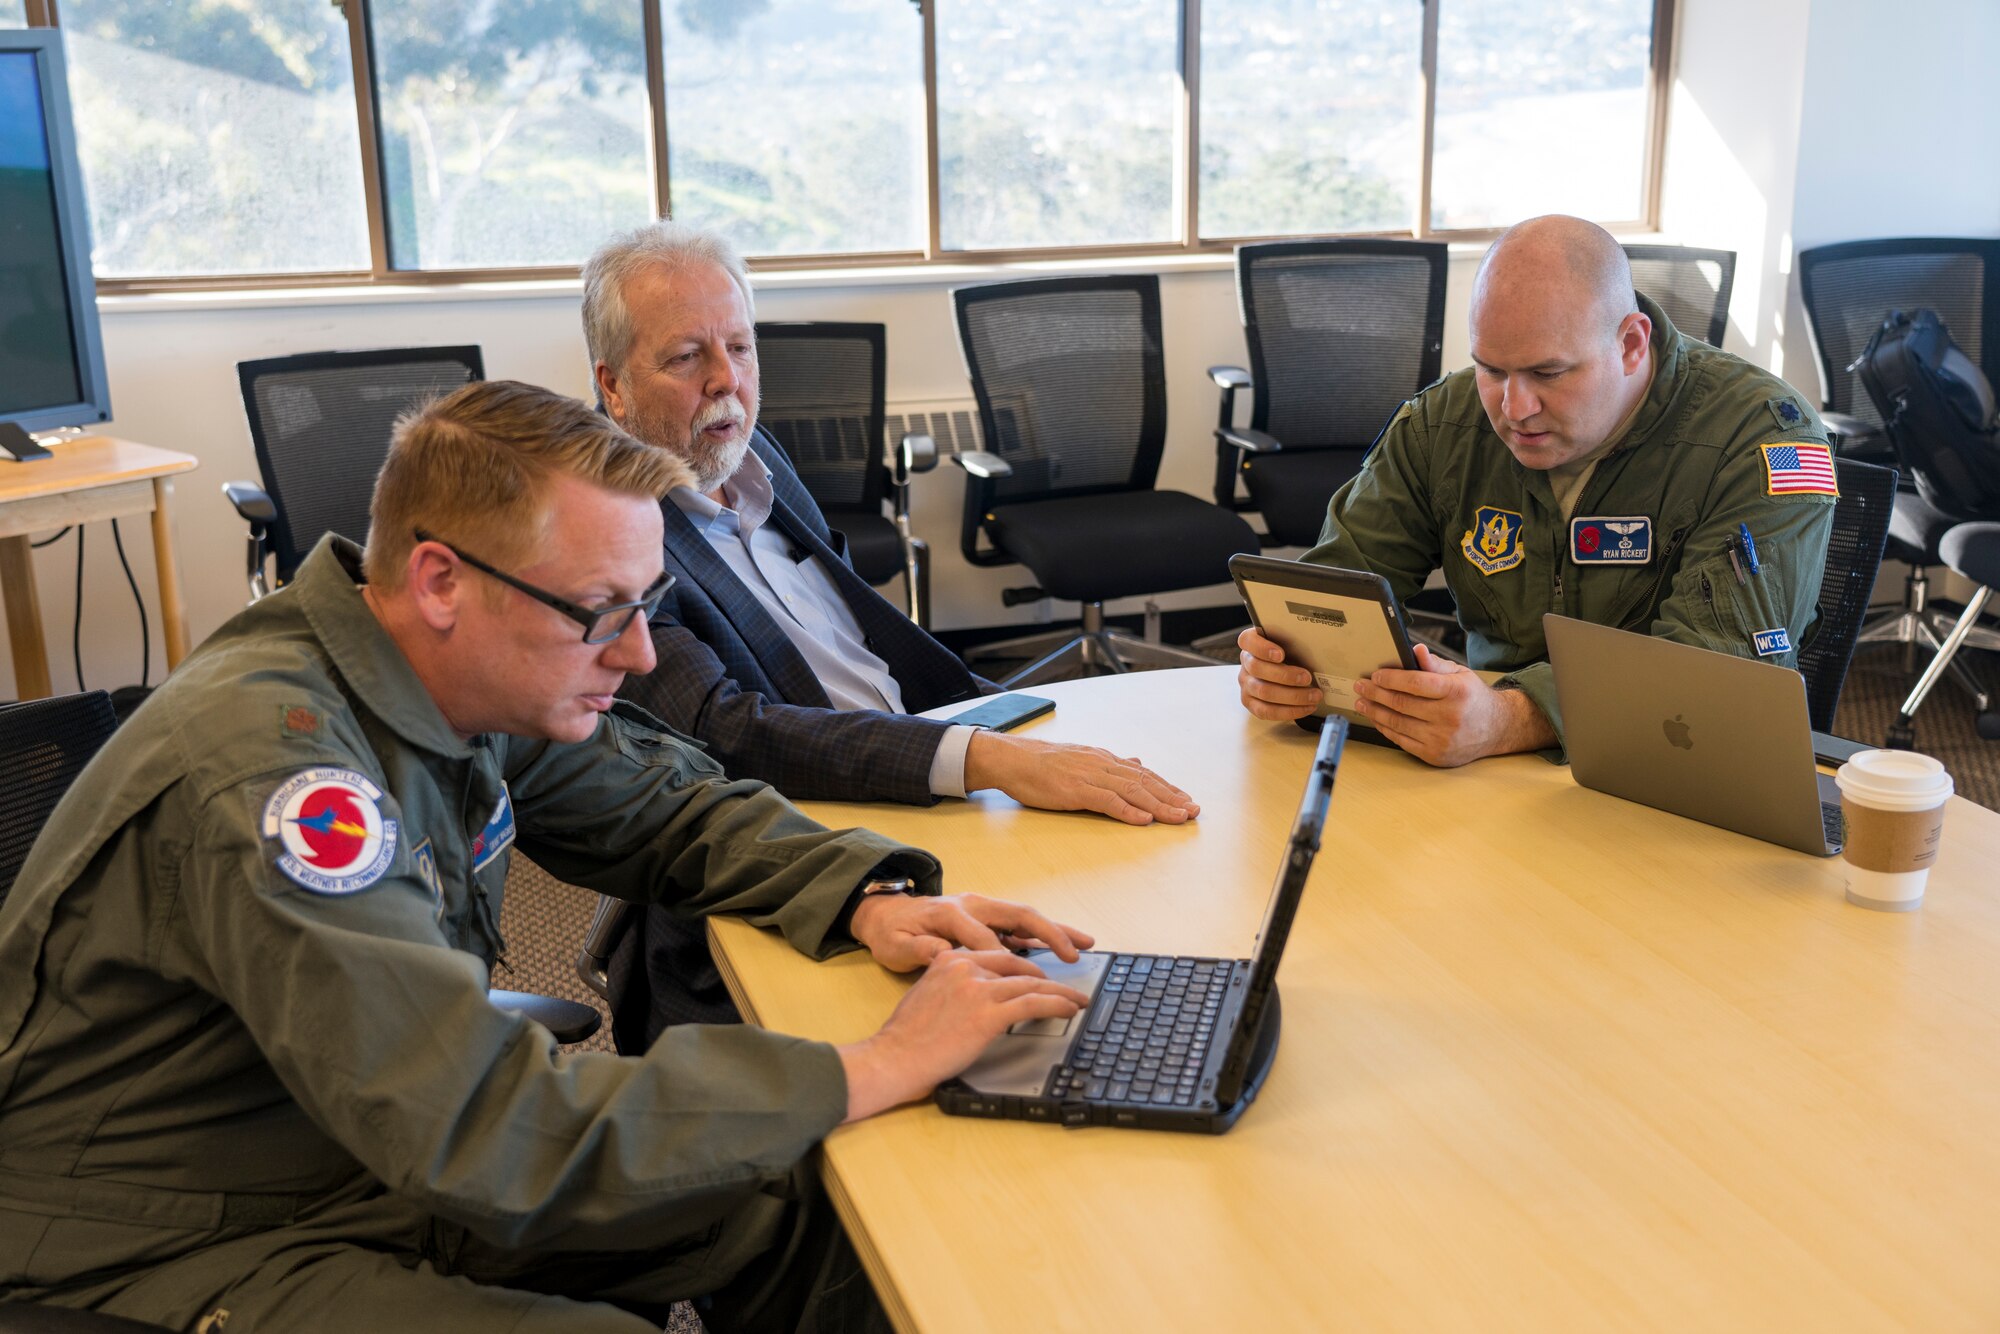 From left to right: Maj. Grant Wagner, 53rd Weather Reconnaissance Squadron navigator,  F. Martin Ralph, principal investigator for the Atmospheric River Recon program and director of the Center for Western Weather and Water Extremes and Lt Col. Ryan Rickert, 53rd WRS aerial weather reconnaissance officer, work on a flight plan for the next atmospheric river mission Jan. 30 at San Diego, Calif. The Hurricane Hunters are slated to perform “AR recon” from January through March. Scientists led by Scripps at University of California, in partnership with the 53rd WRS, National Oceanic and Atmospheric Aviation’s National Weather Service, NOAA’s Office of Marine and Aviation Operations, will be on standby to fly through these ARs over the Pacific to gather data to improve forecasts. (U.S. Air Force photo by Tech. Sgt. Christopher Carranza)